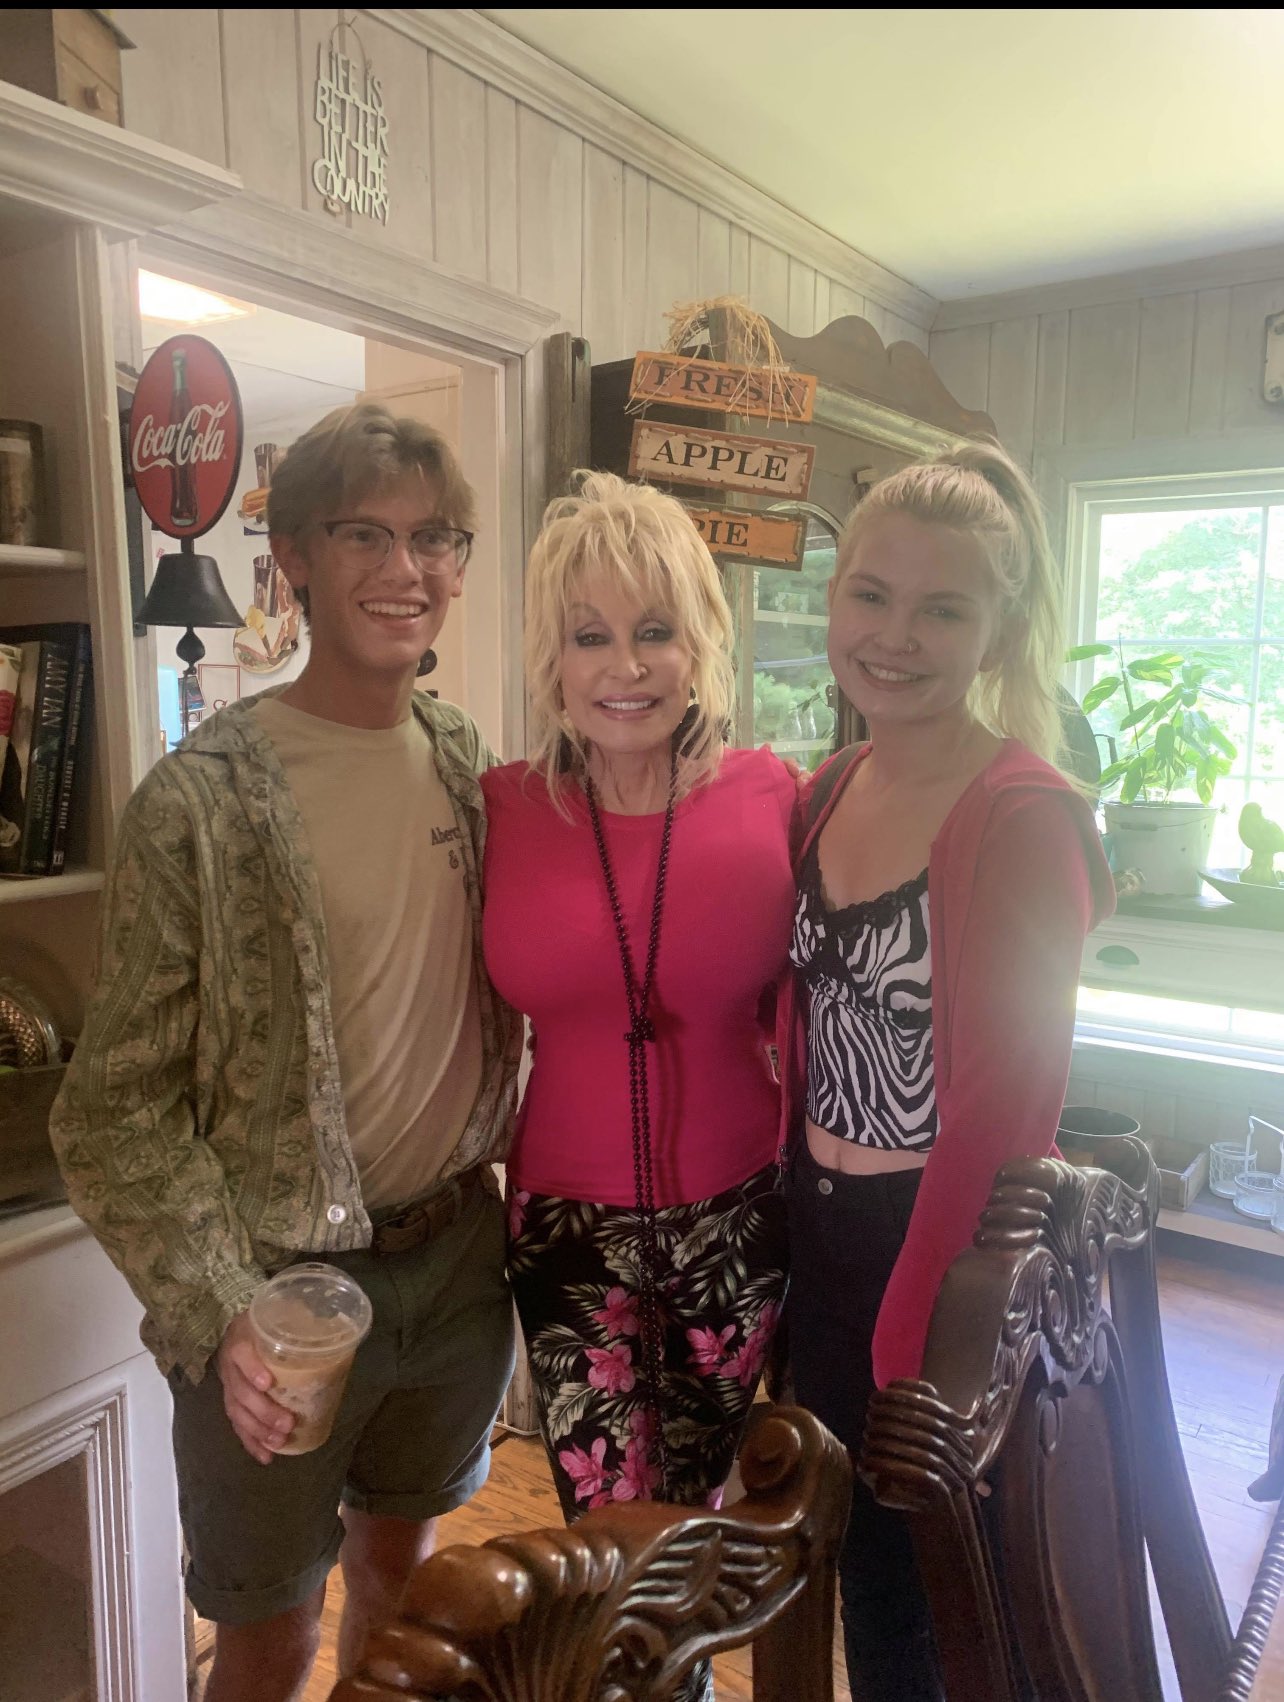 Nick Beres on X: GUESS WHO WAS OUT SPOTTED SHOPPING ON HER OWN FOR  ANTIQUES IN MT. JULIET, TENNESSEE? Go to Nick Beres Nc5 on Facebook for the  story.#Dolly t.cosfJnqi10ZA  X